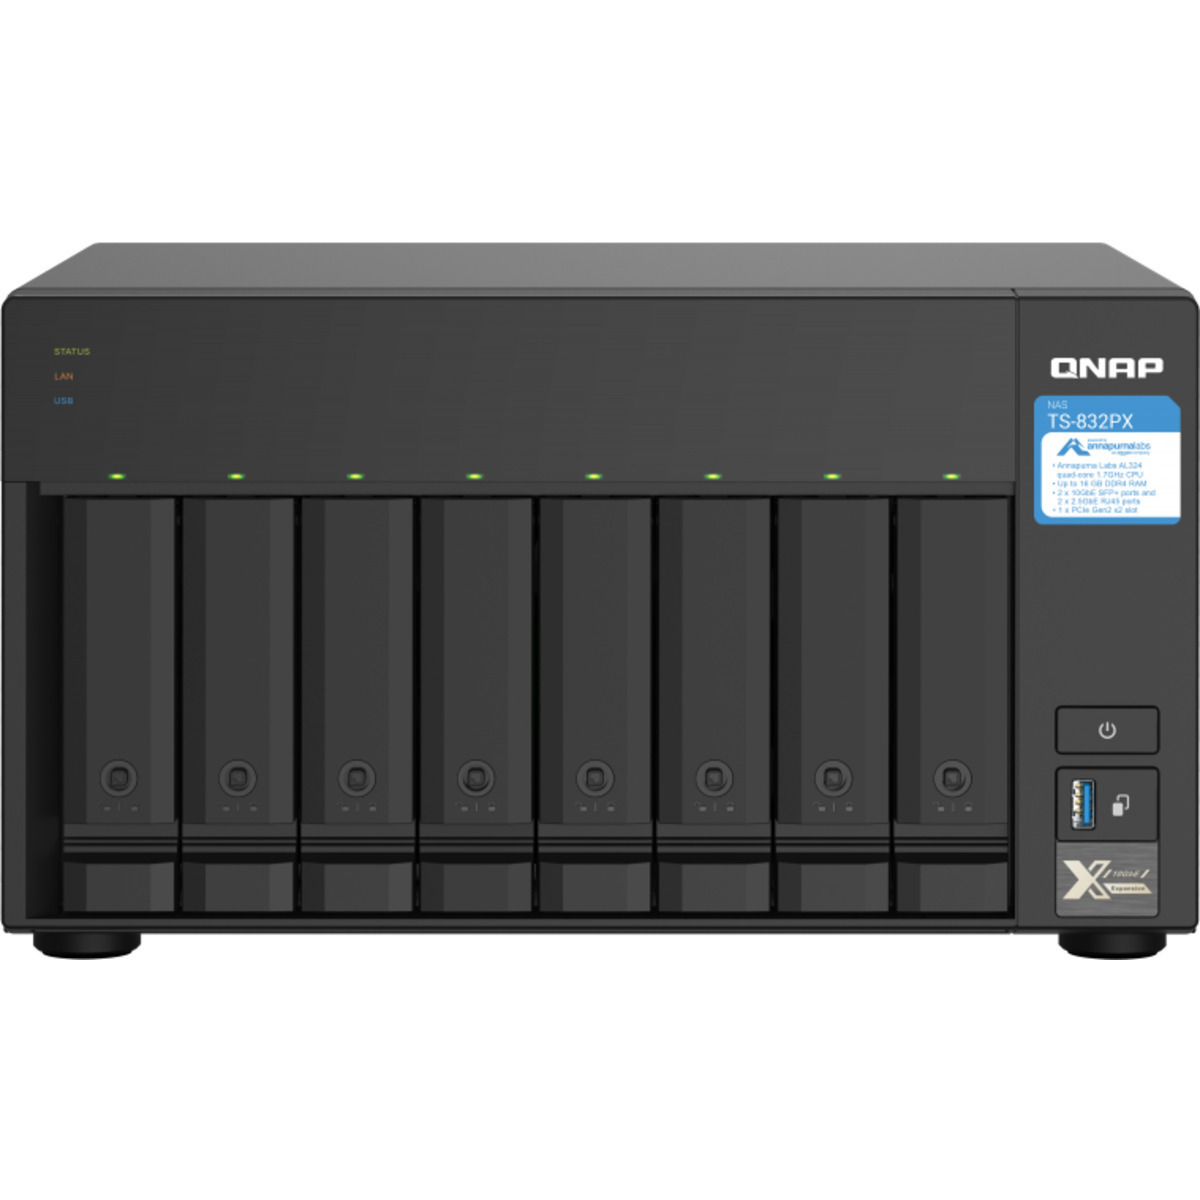 QNAP TS-832PX 108tb 8-Bay Desktop Multimedia / Power User / Business NAS - Network Attached Storage Device 6x18tb Western Digital Red Pro WD181KFGX 3.5 7200rpm SATA 6Gb/s HDD NAS Class Drives Installed - Burn-In Tested - FREE RAM UPGRADE TS-832PX